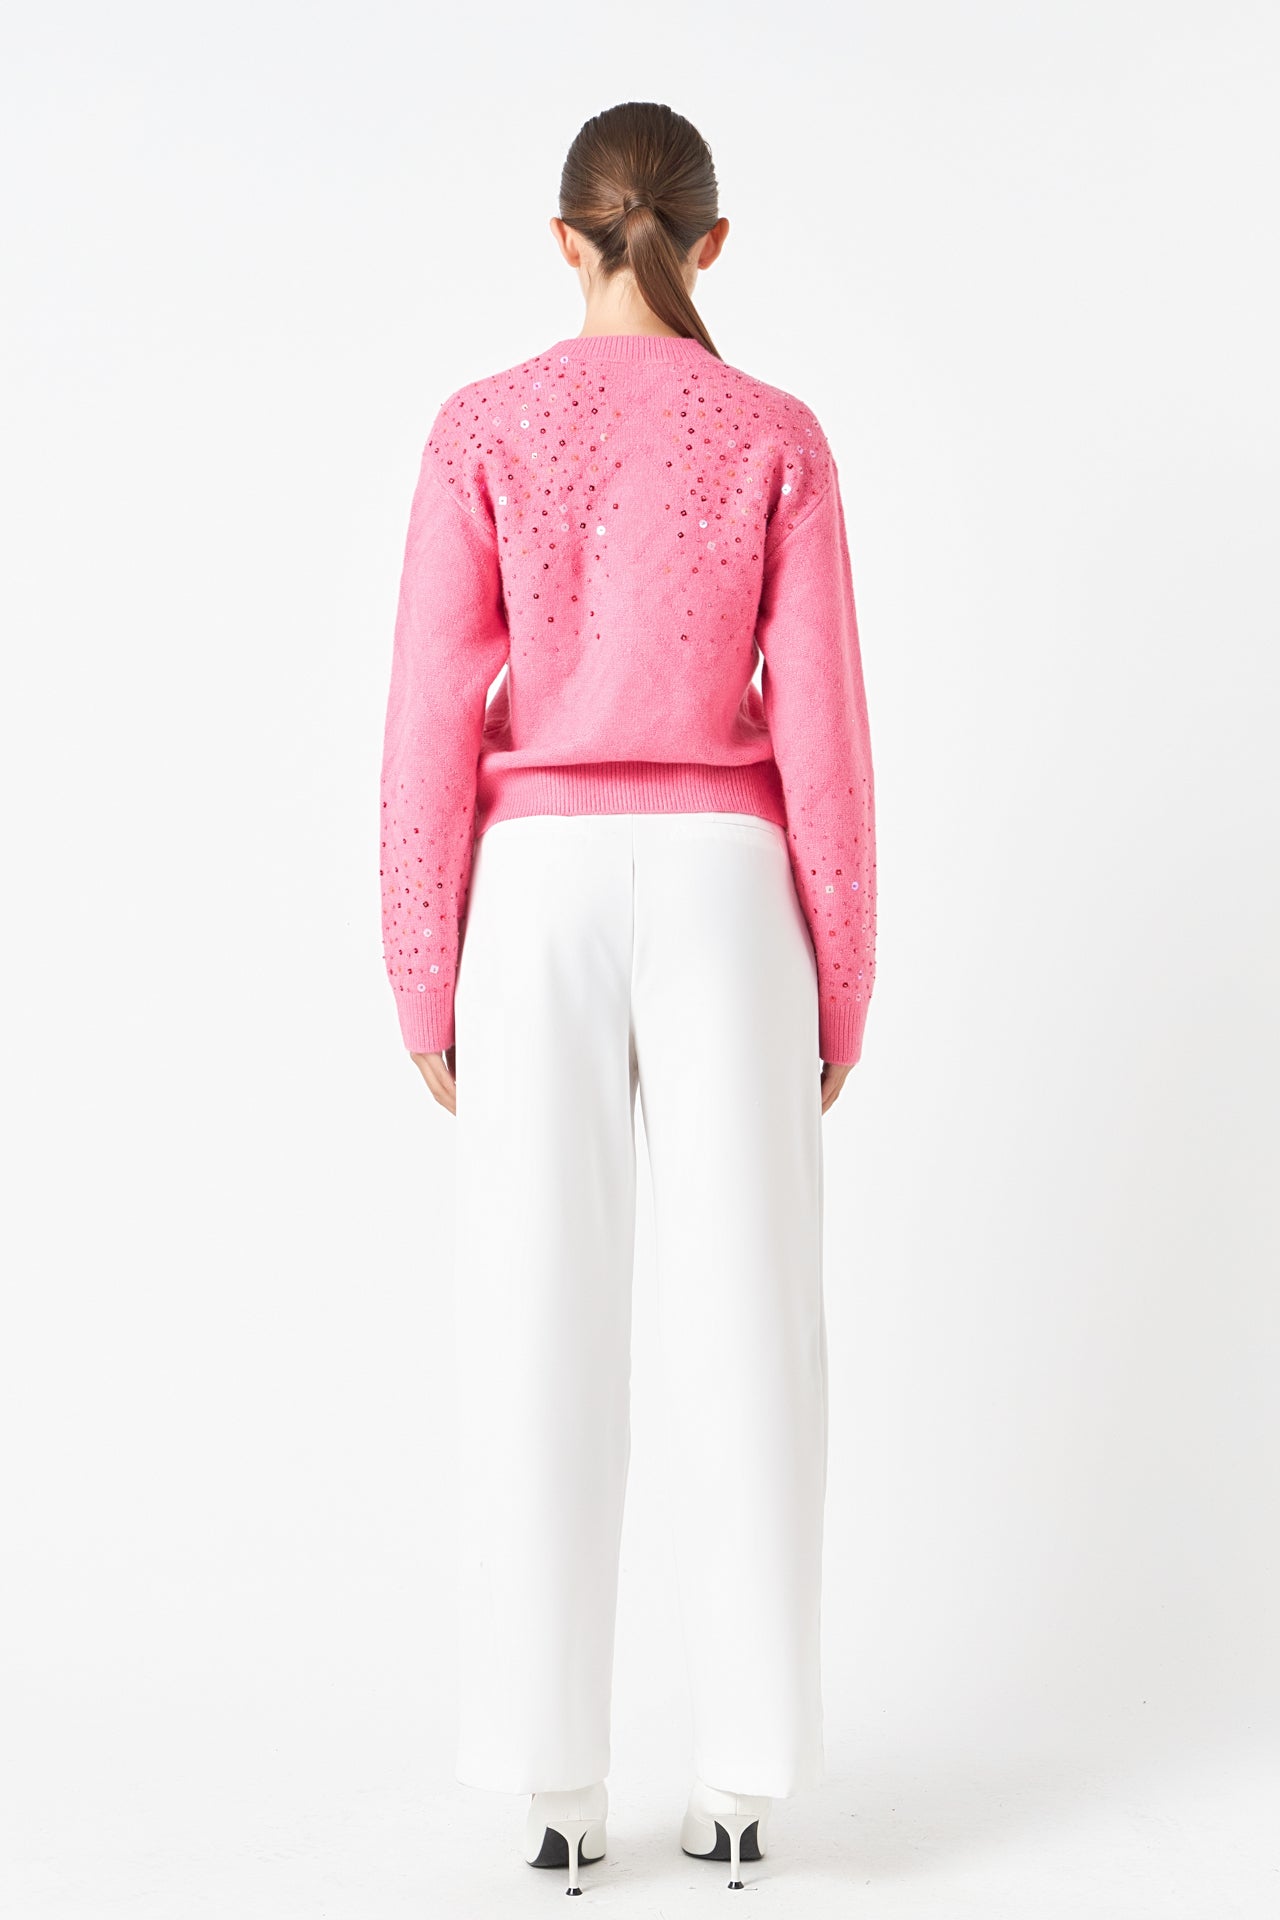 ENDLESS ROSE - Sequins Knit Sweater - SWEATERS & KNITS available at Objectrare